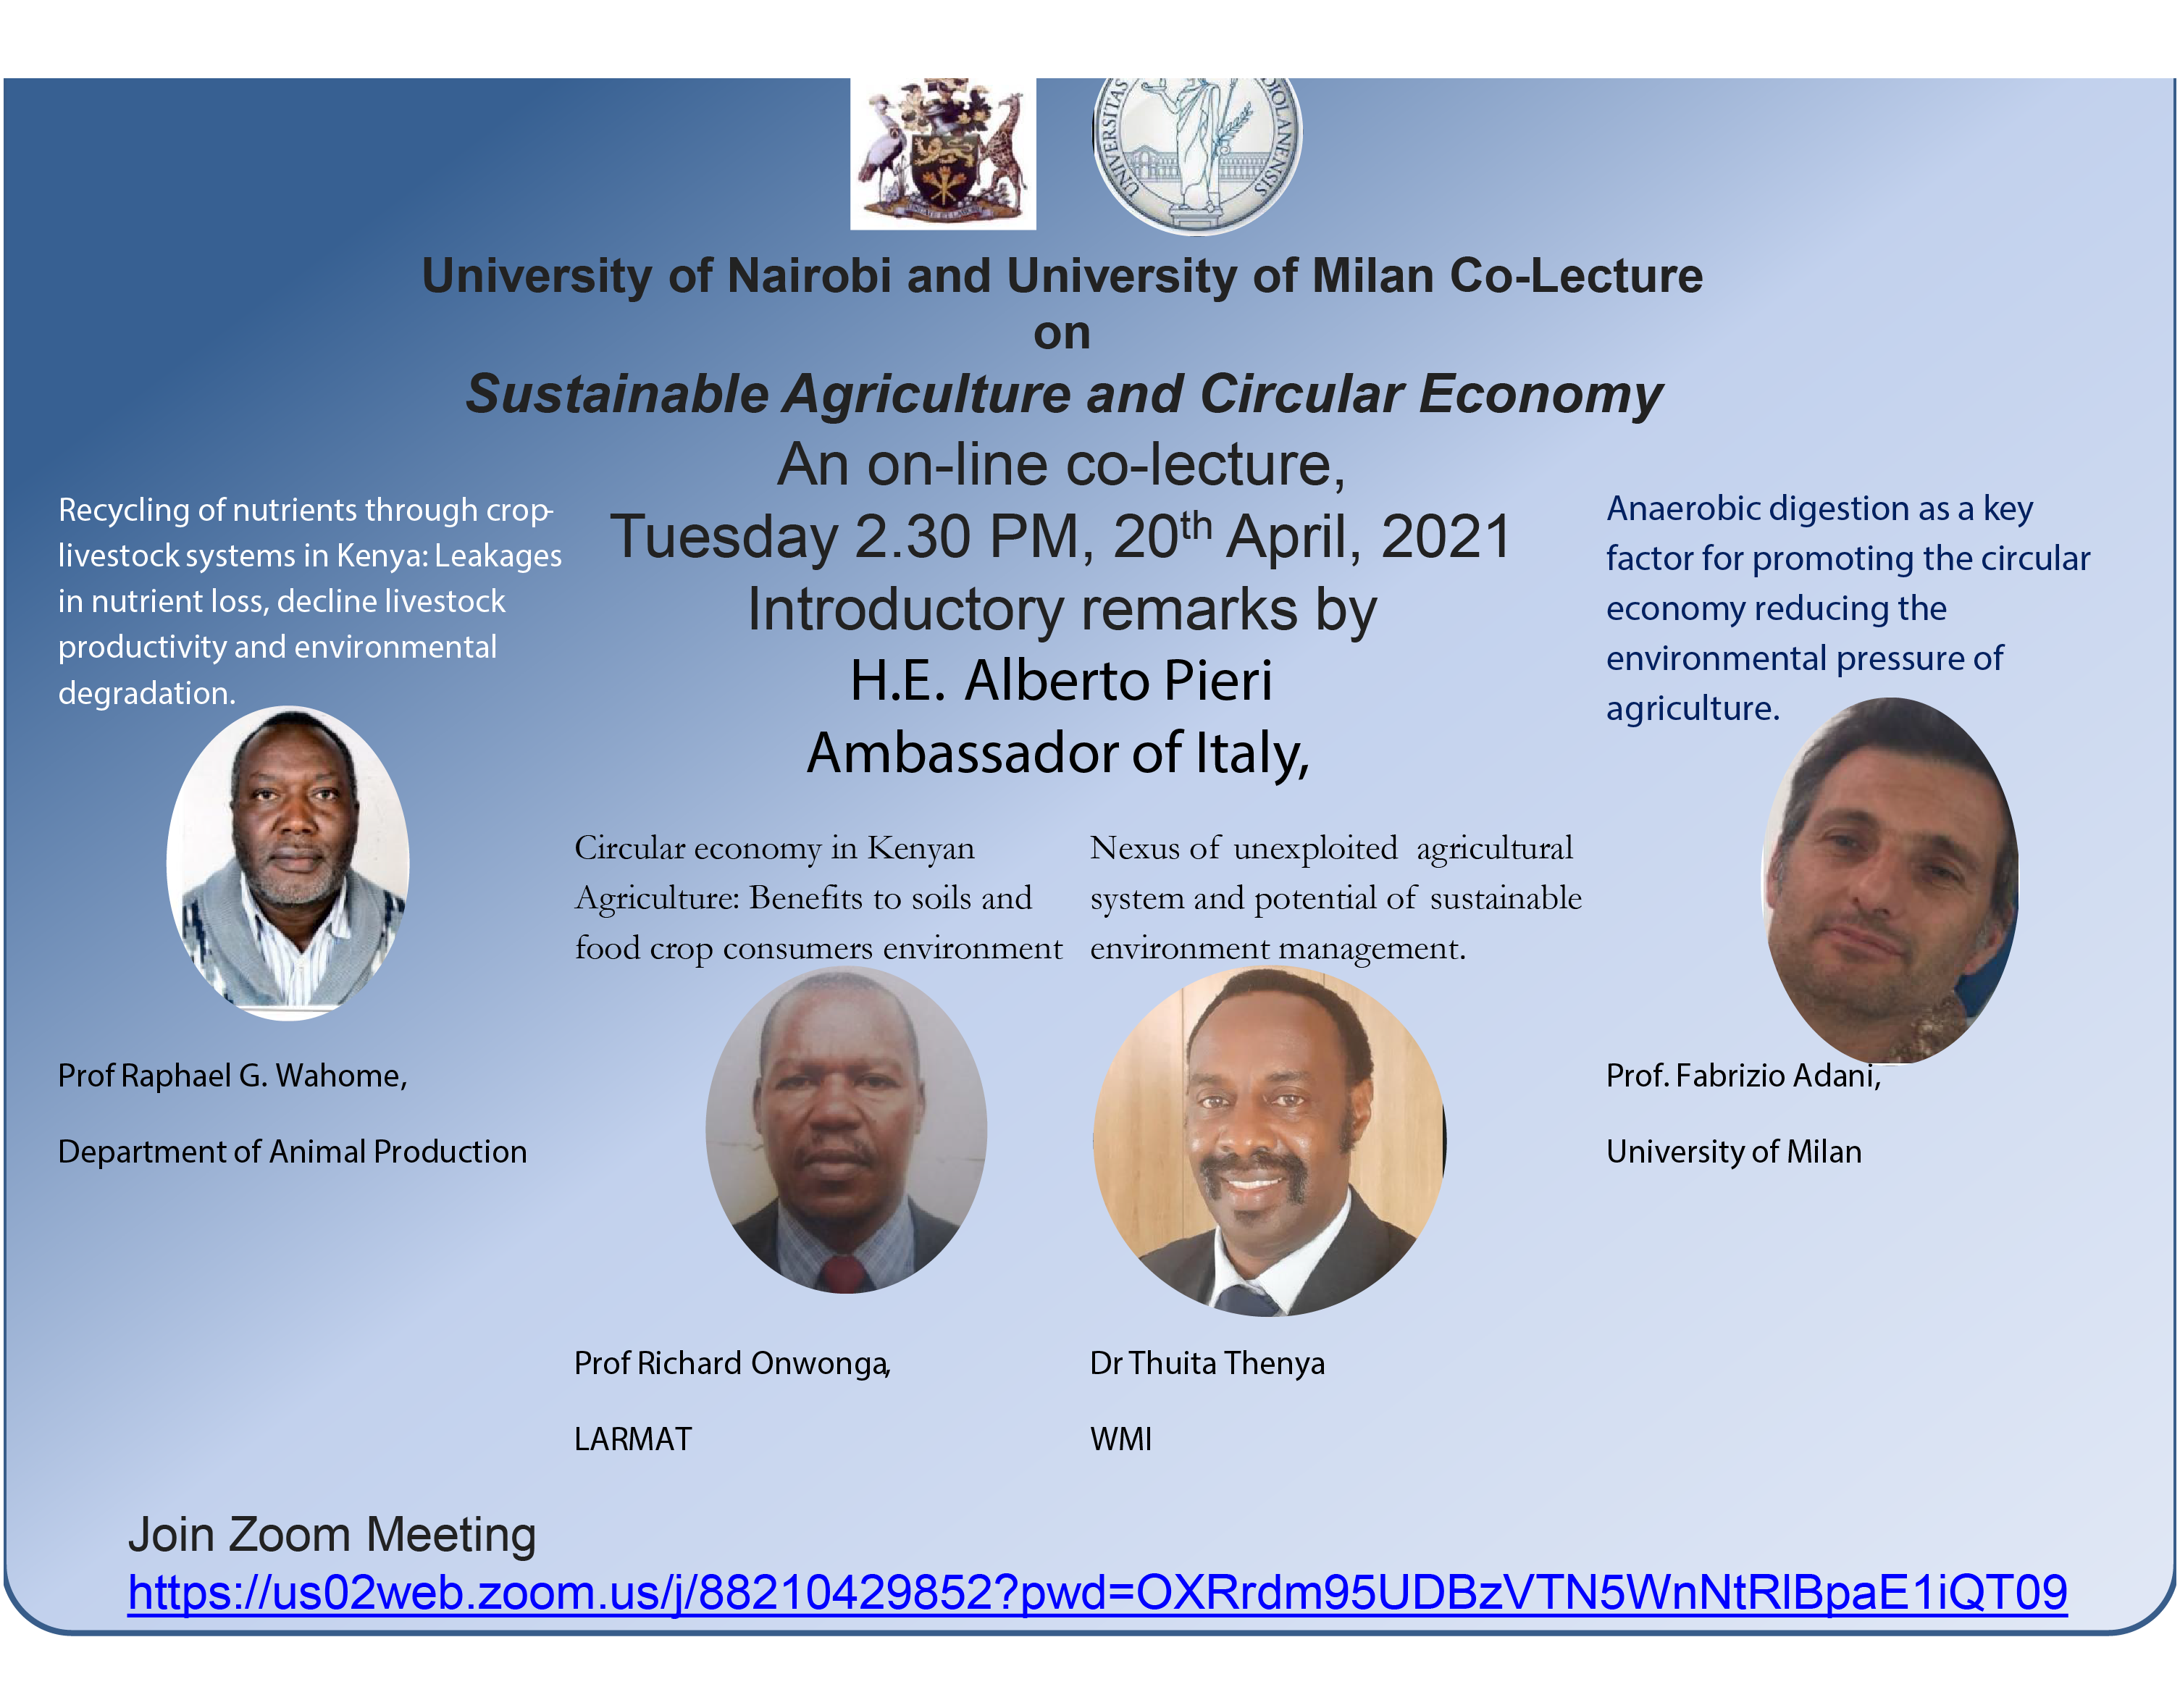 University of Nairobi and University of Milan Co-Lecture on Sustainable Agriculture and Circular Economy